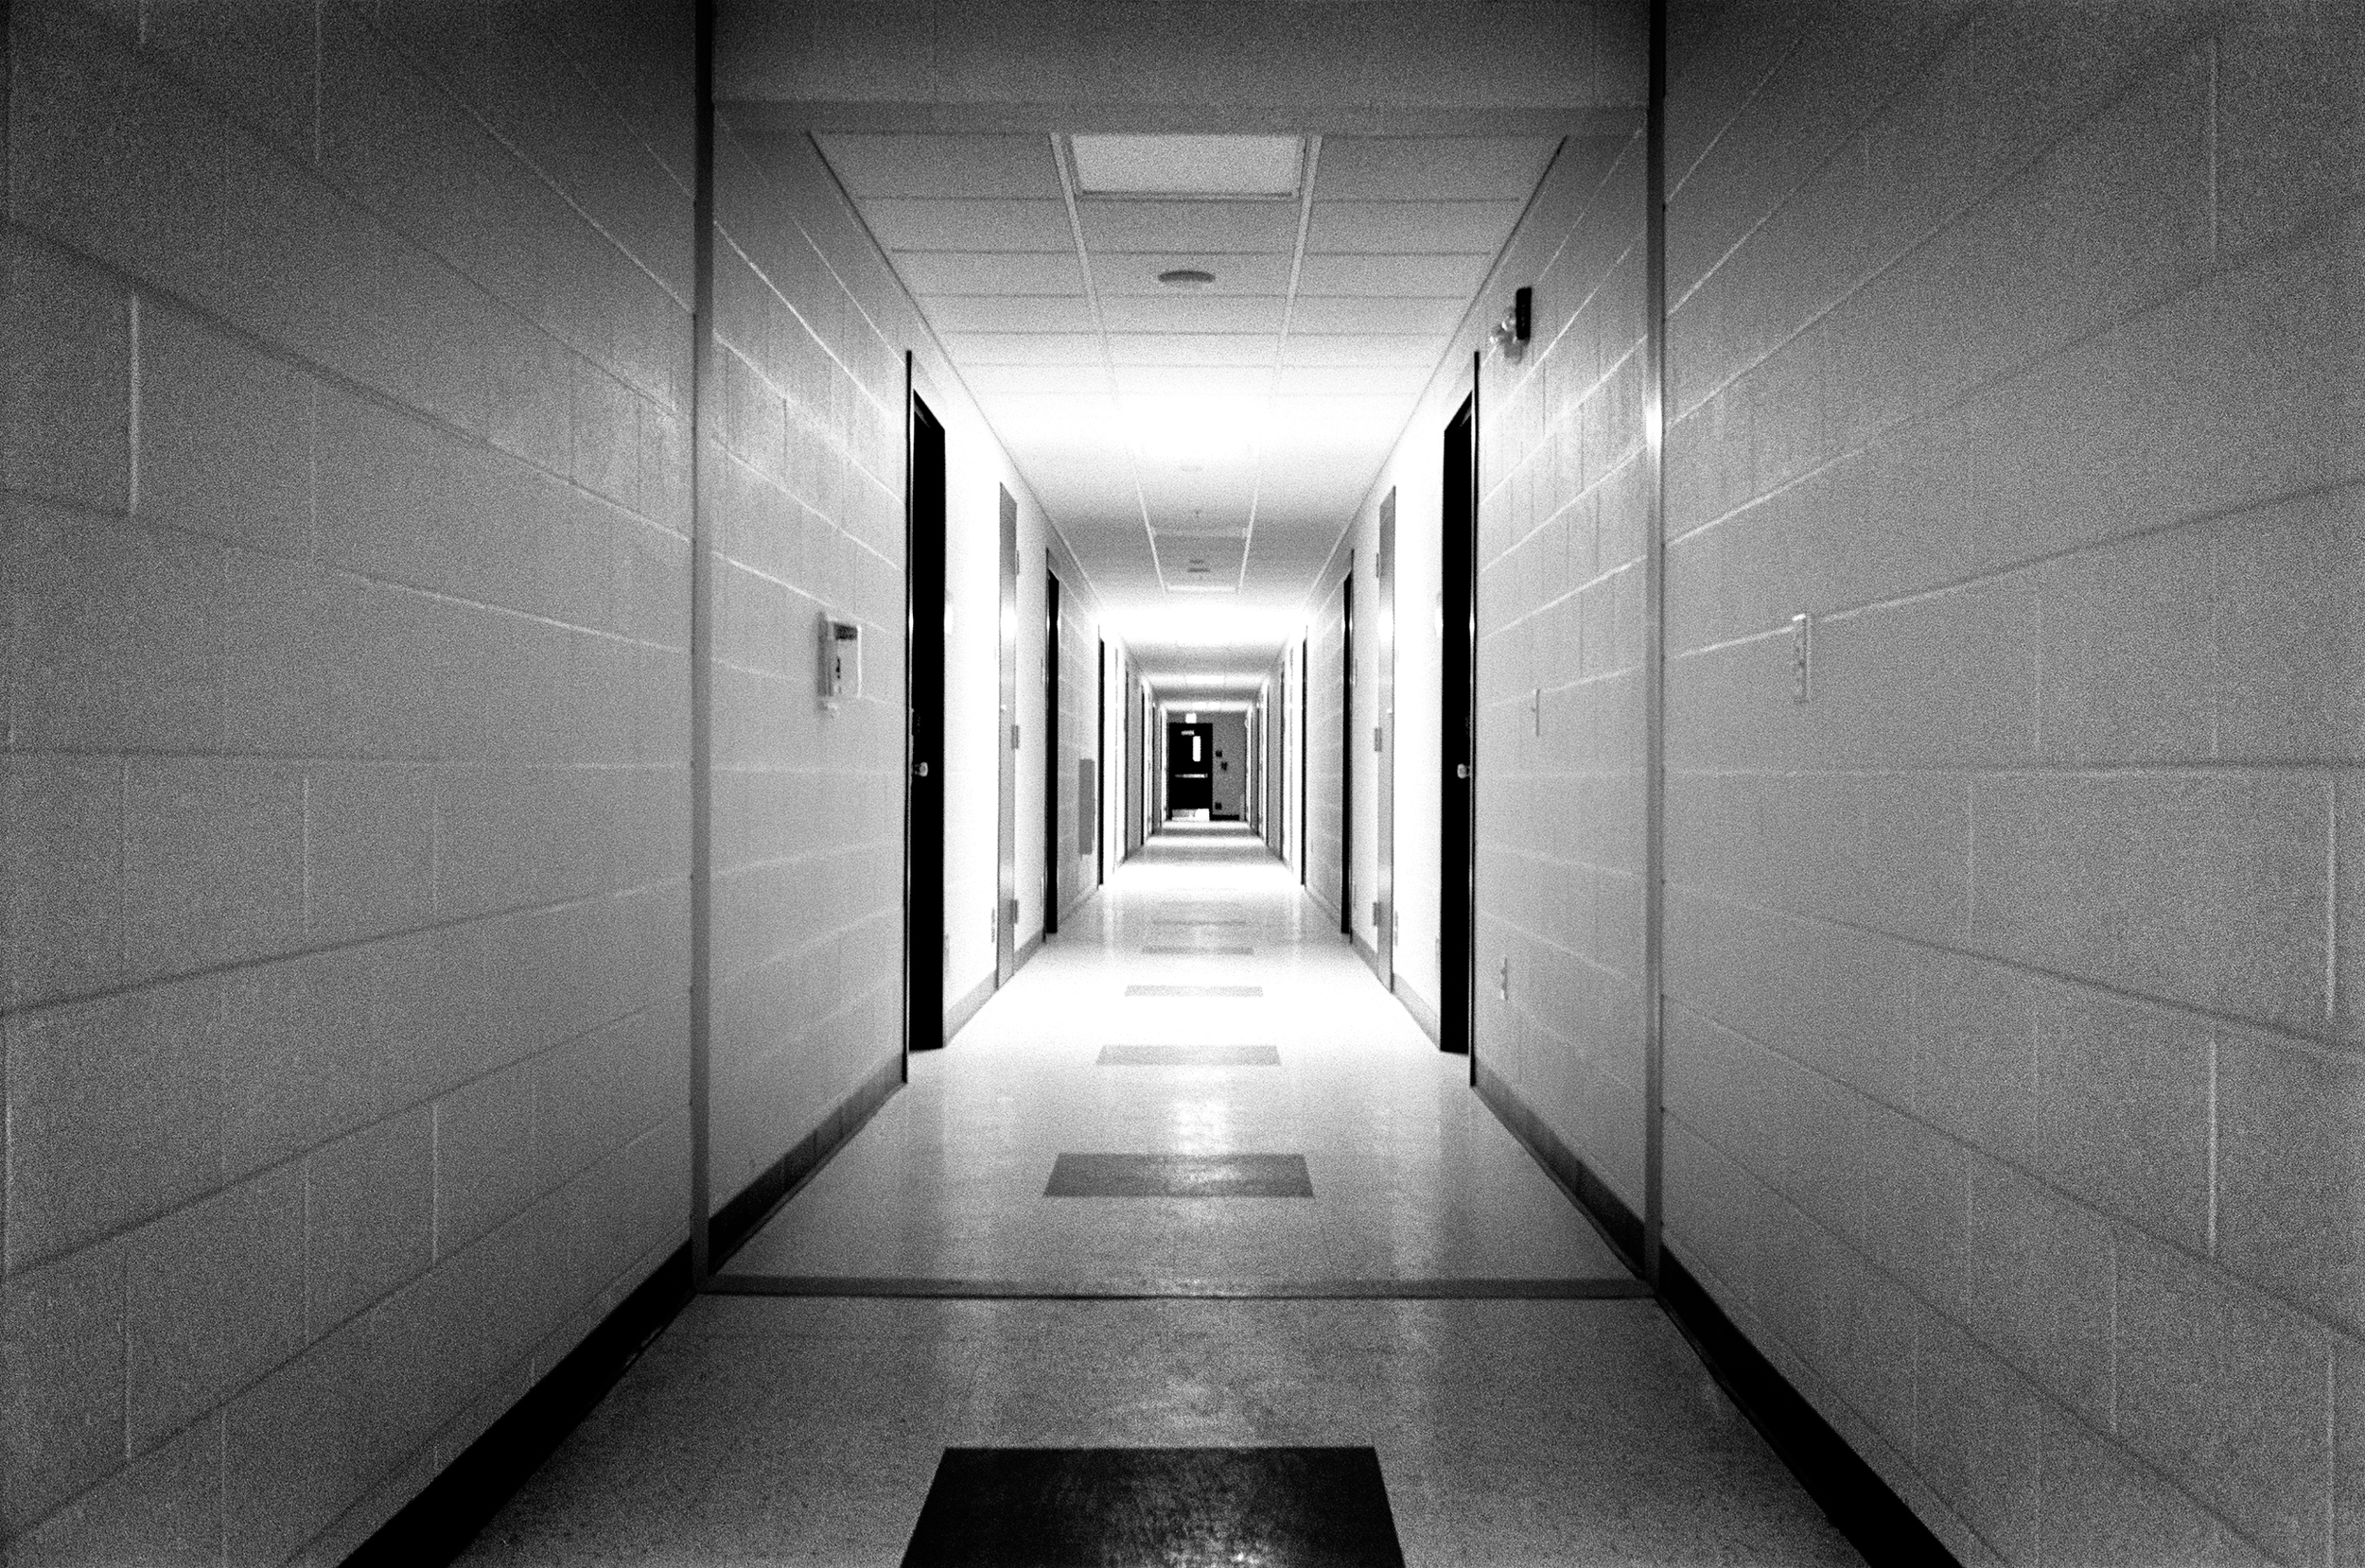  The barrack hallways stand deserted while soldiers are on leave;&nbsp;Fort Drum, 2010. 